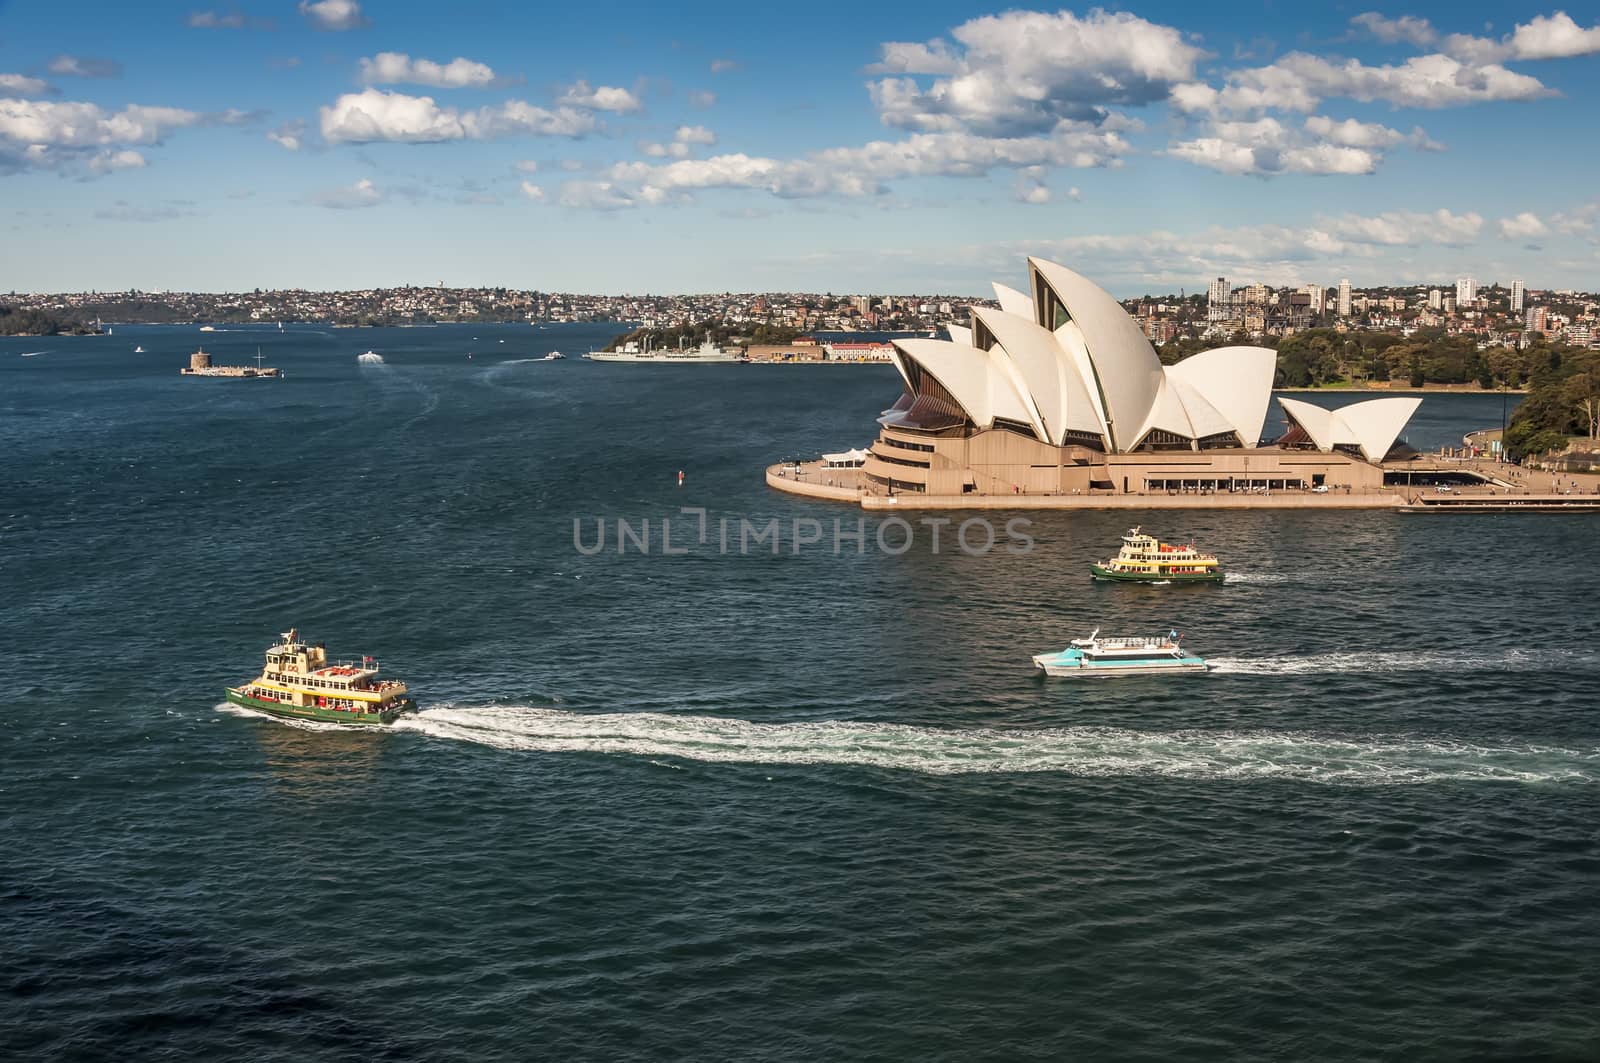 view of the opera house in Sydney, Australia